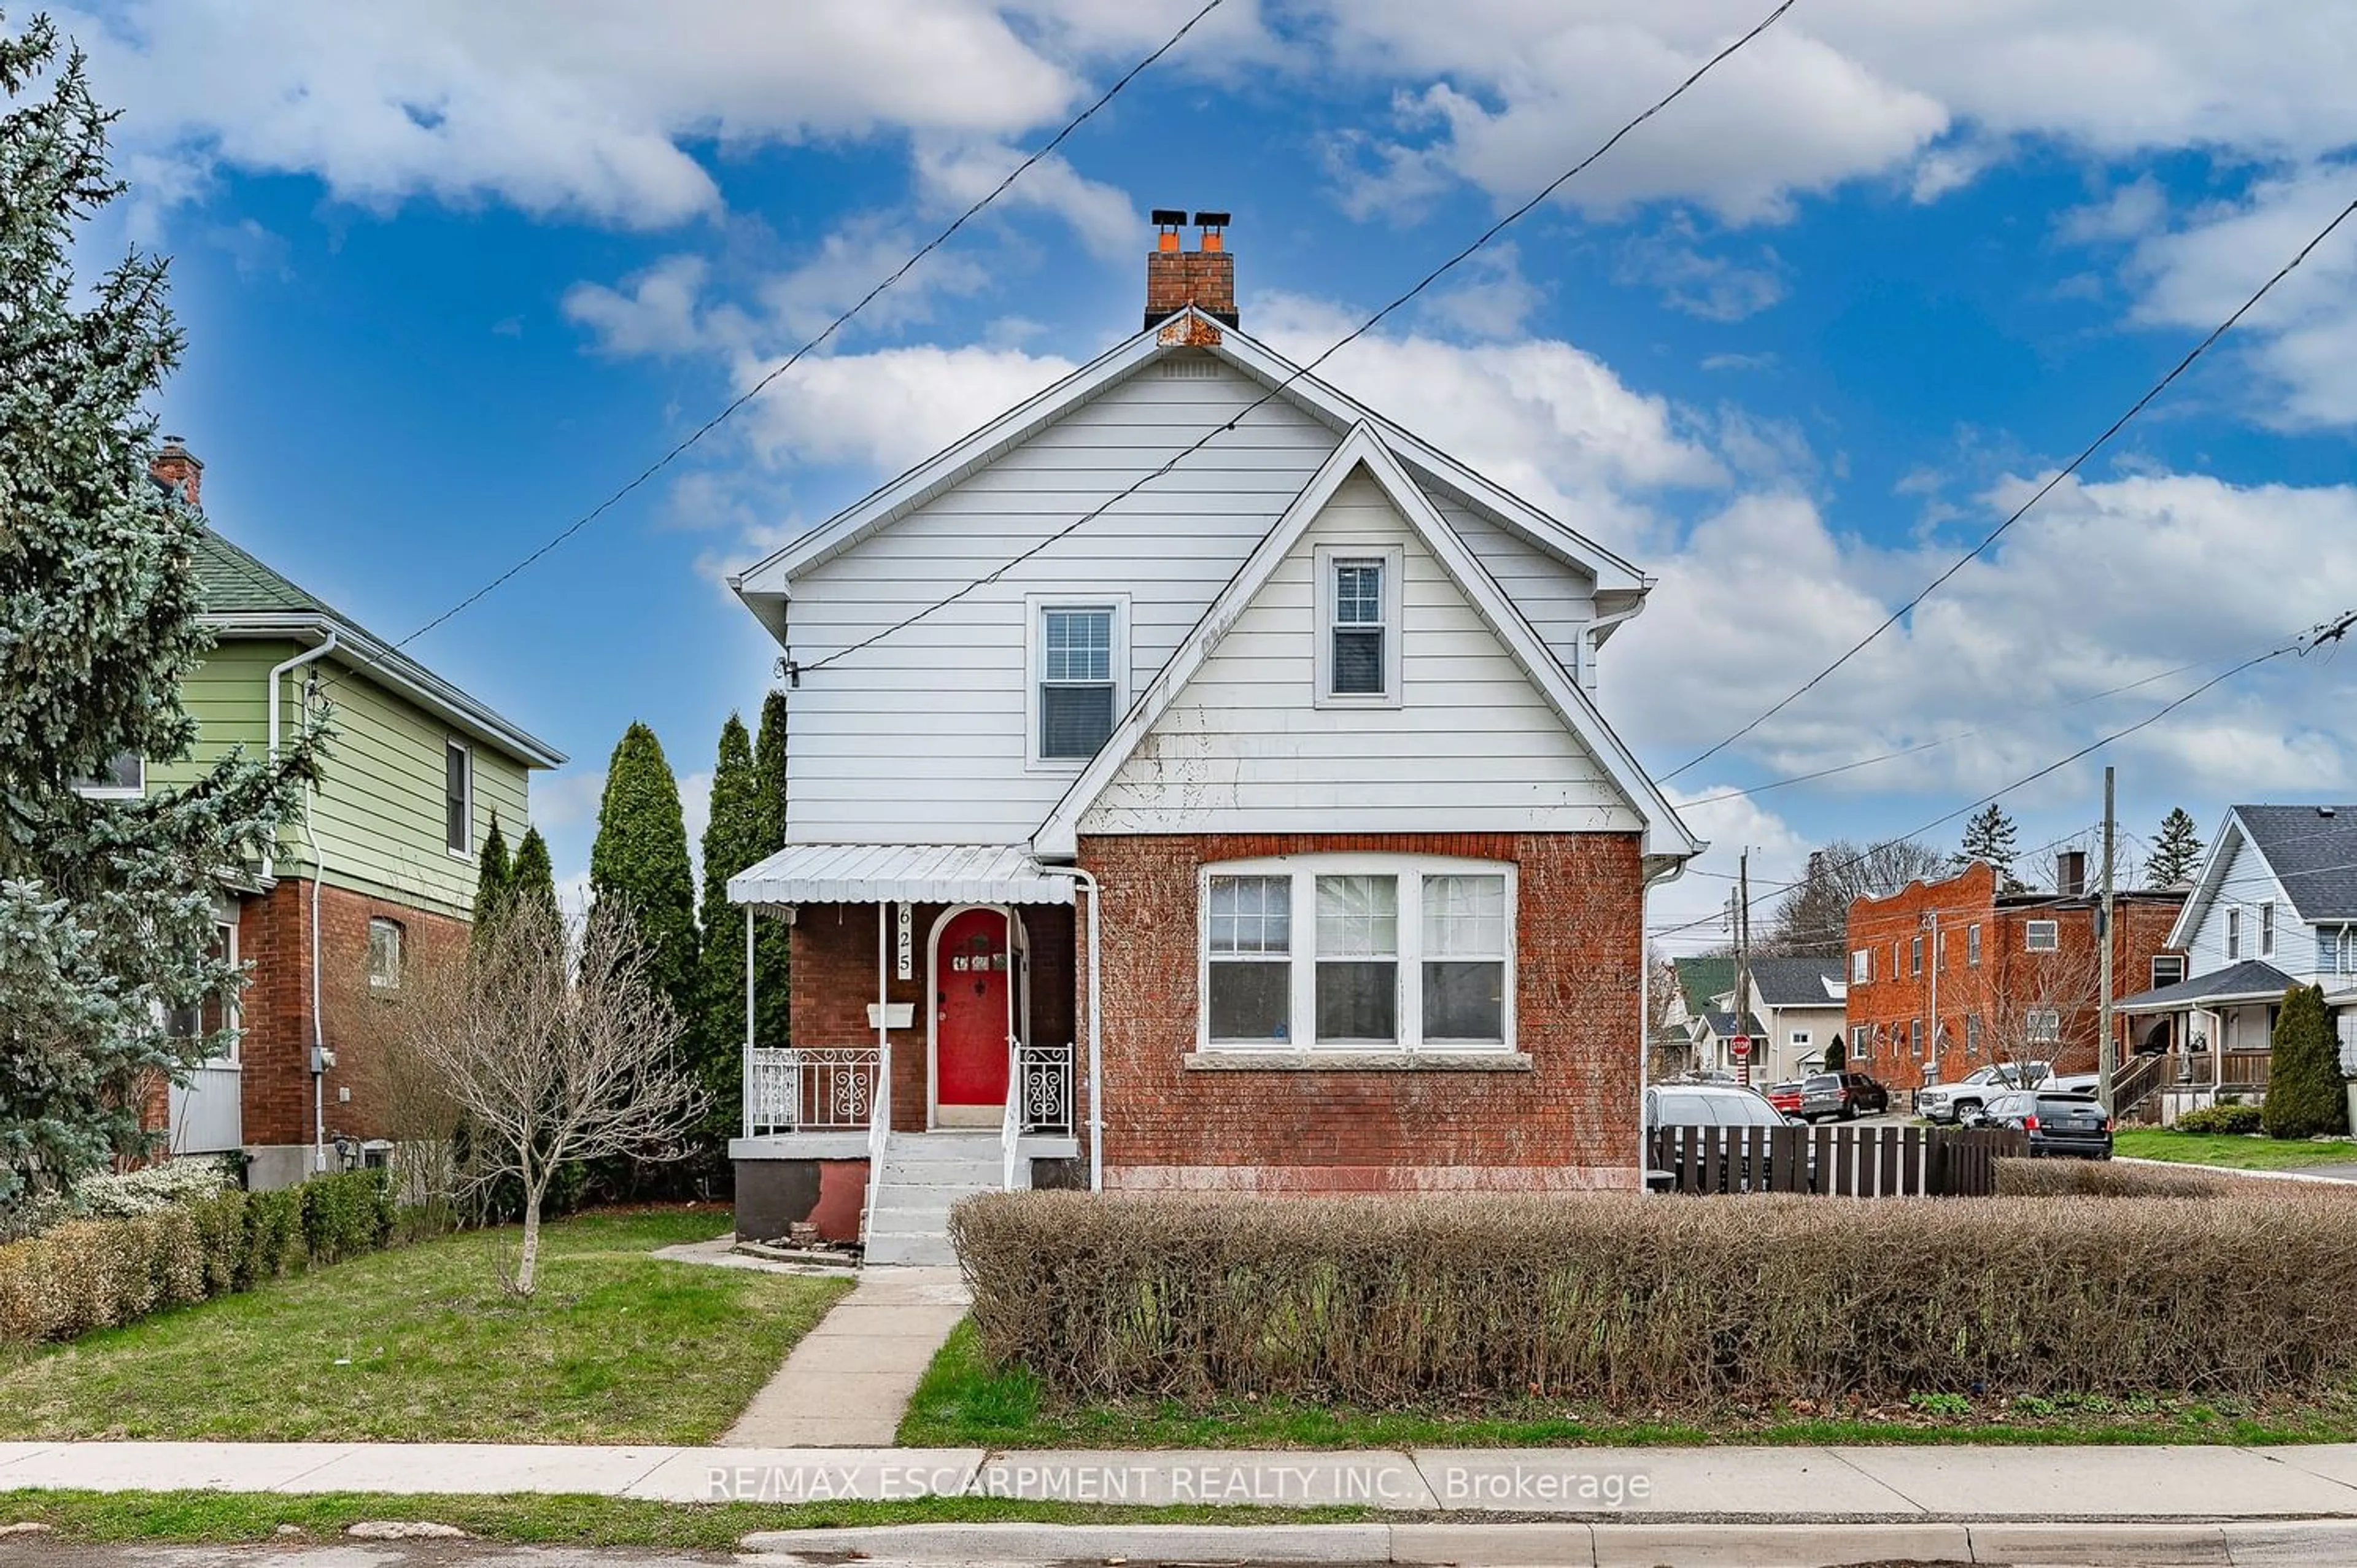 Frontside or backside of a home for 4625 Fifth Ave, Niagara Falls Ontario L2E 4R7